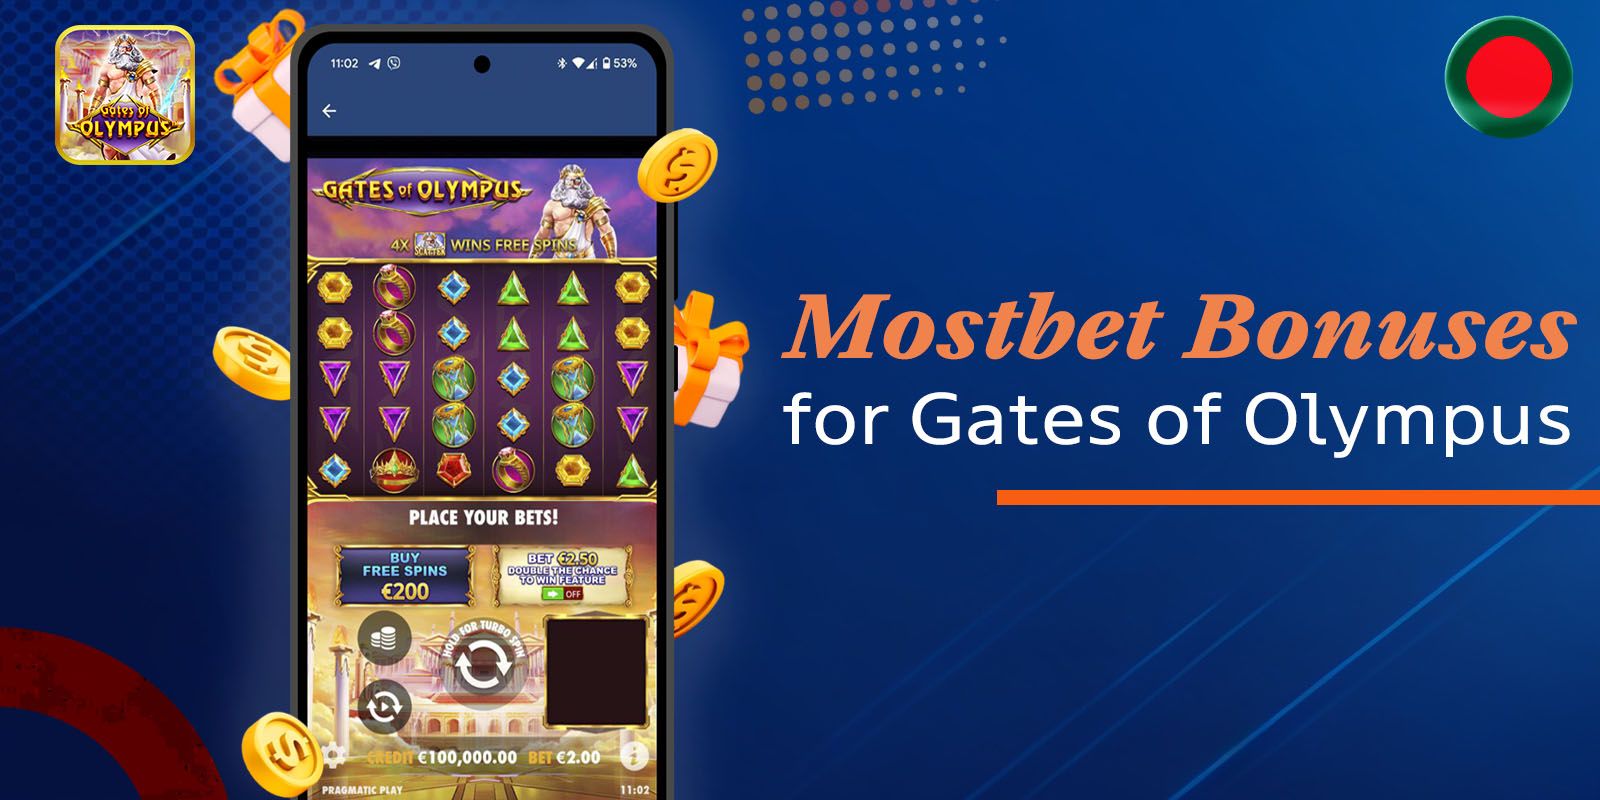 Various bonuses from Mostbet